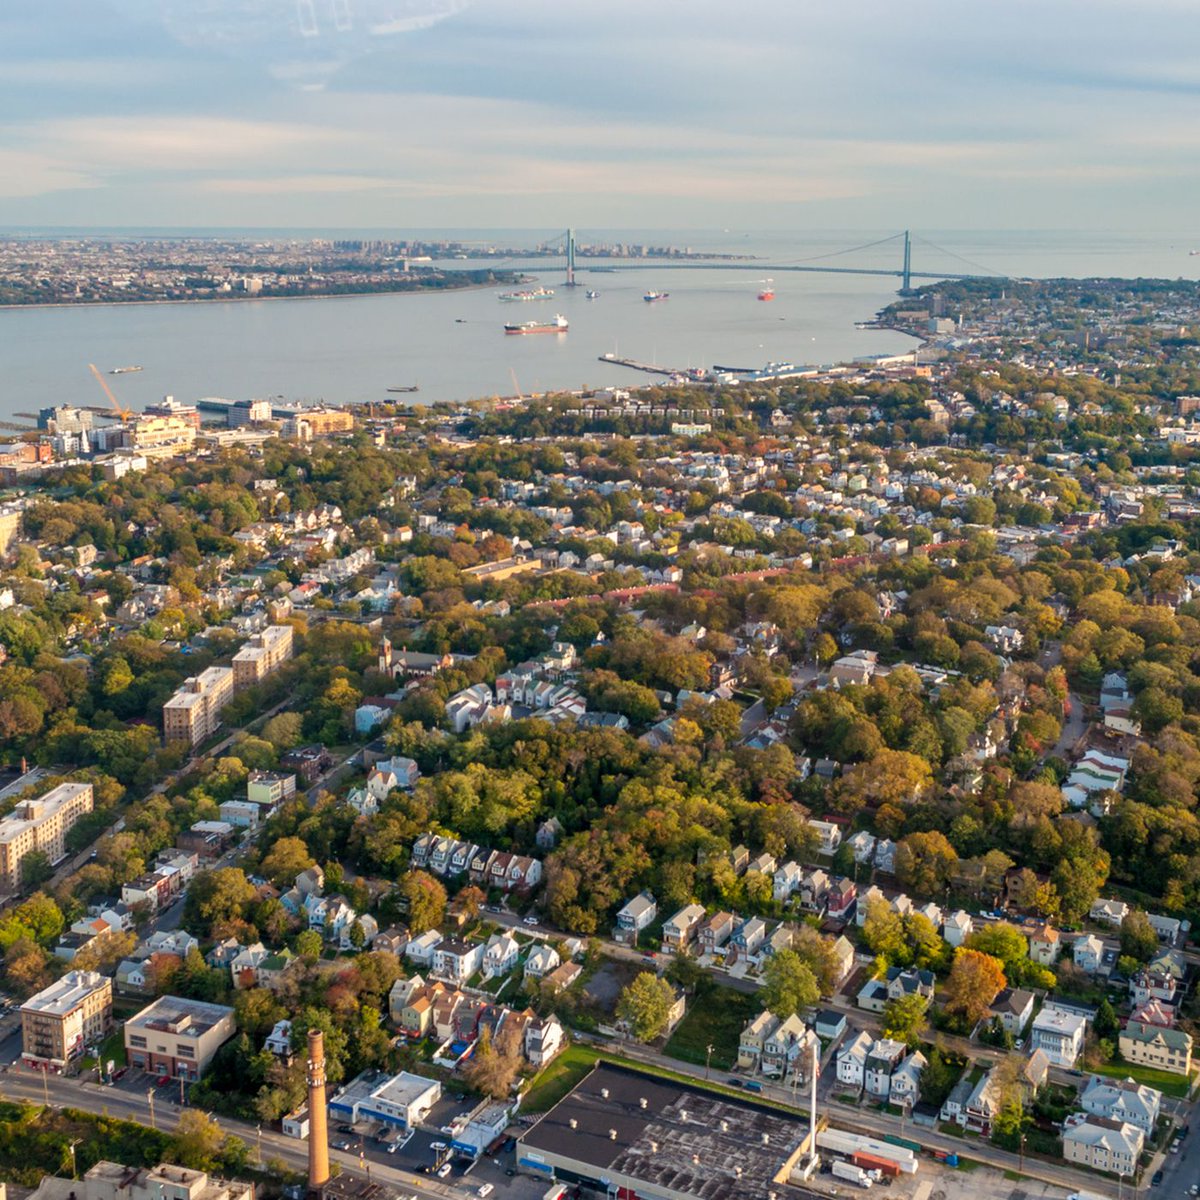 Staten Island calls themselves the 'forgotten borough', but don't realize this is because nobody lives there It's all single family homes directly next to NYC, one of the densest and largest cities in the world If more people lived there, more people would remember they exist